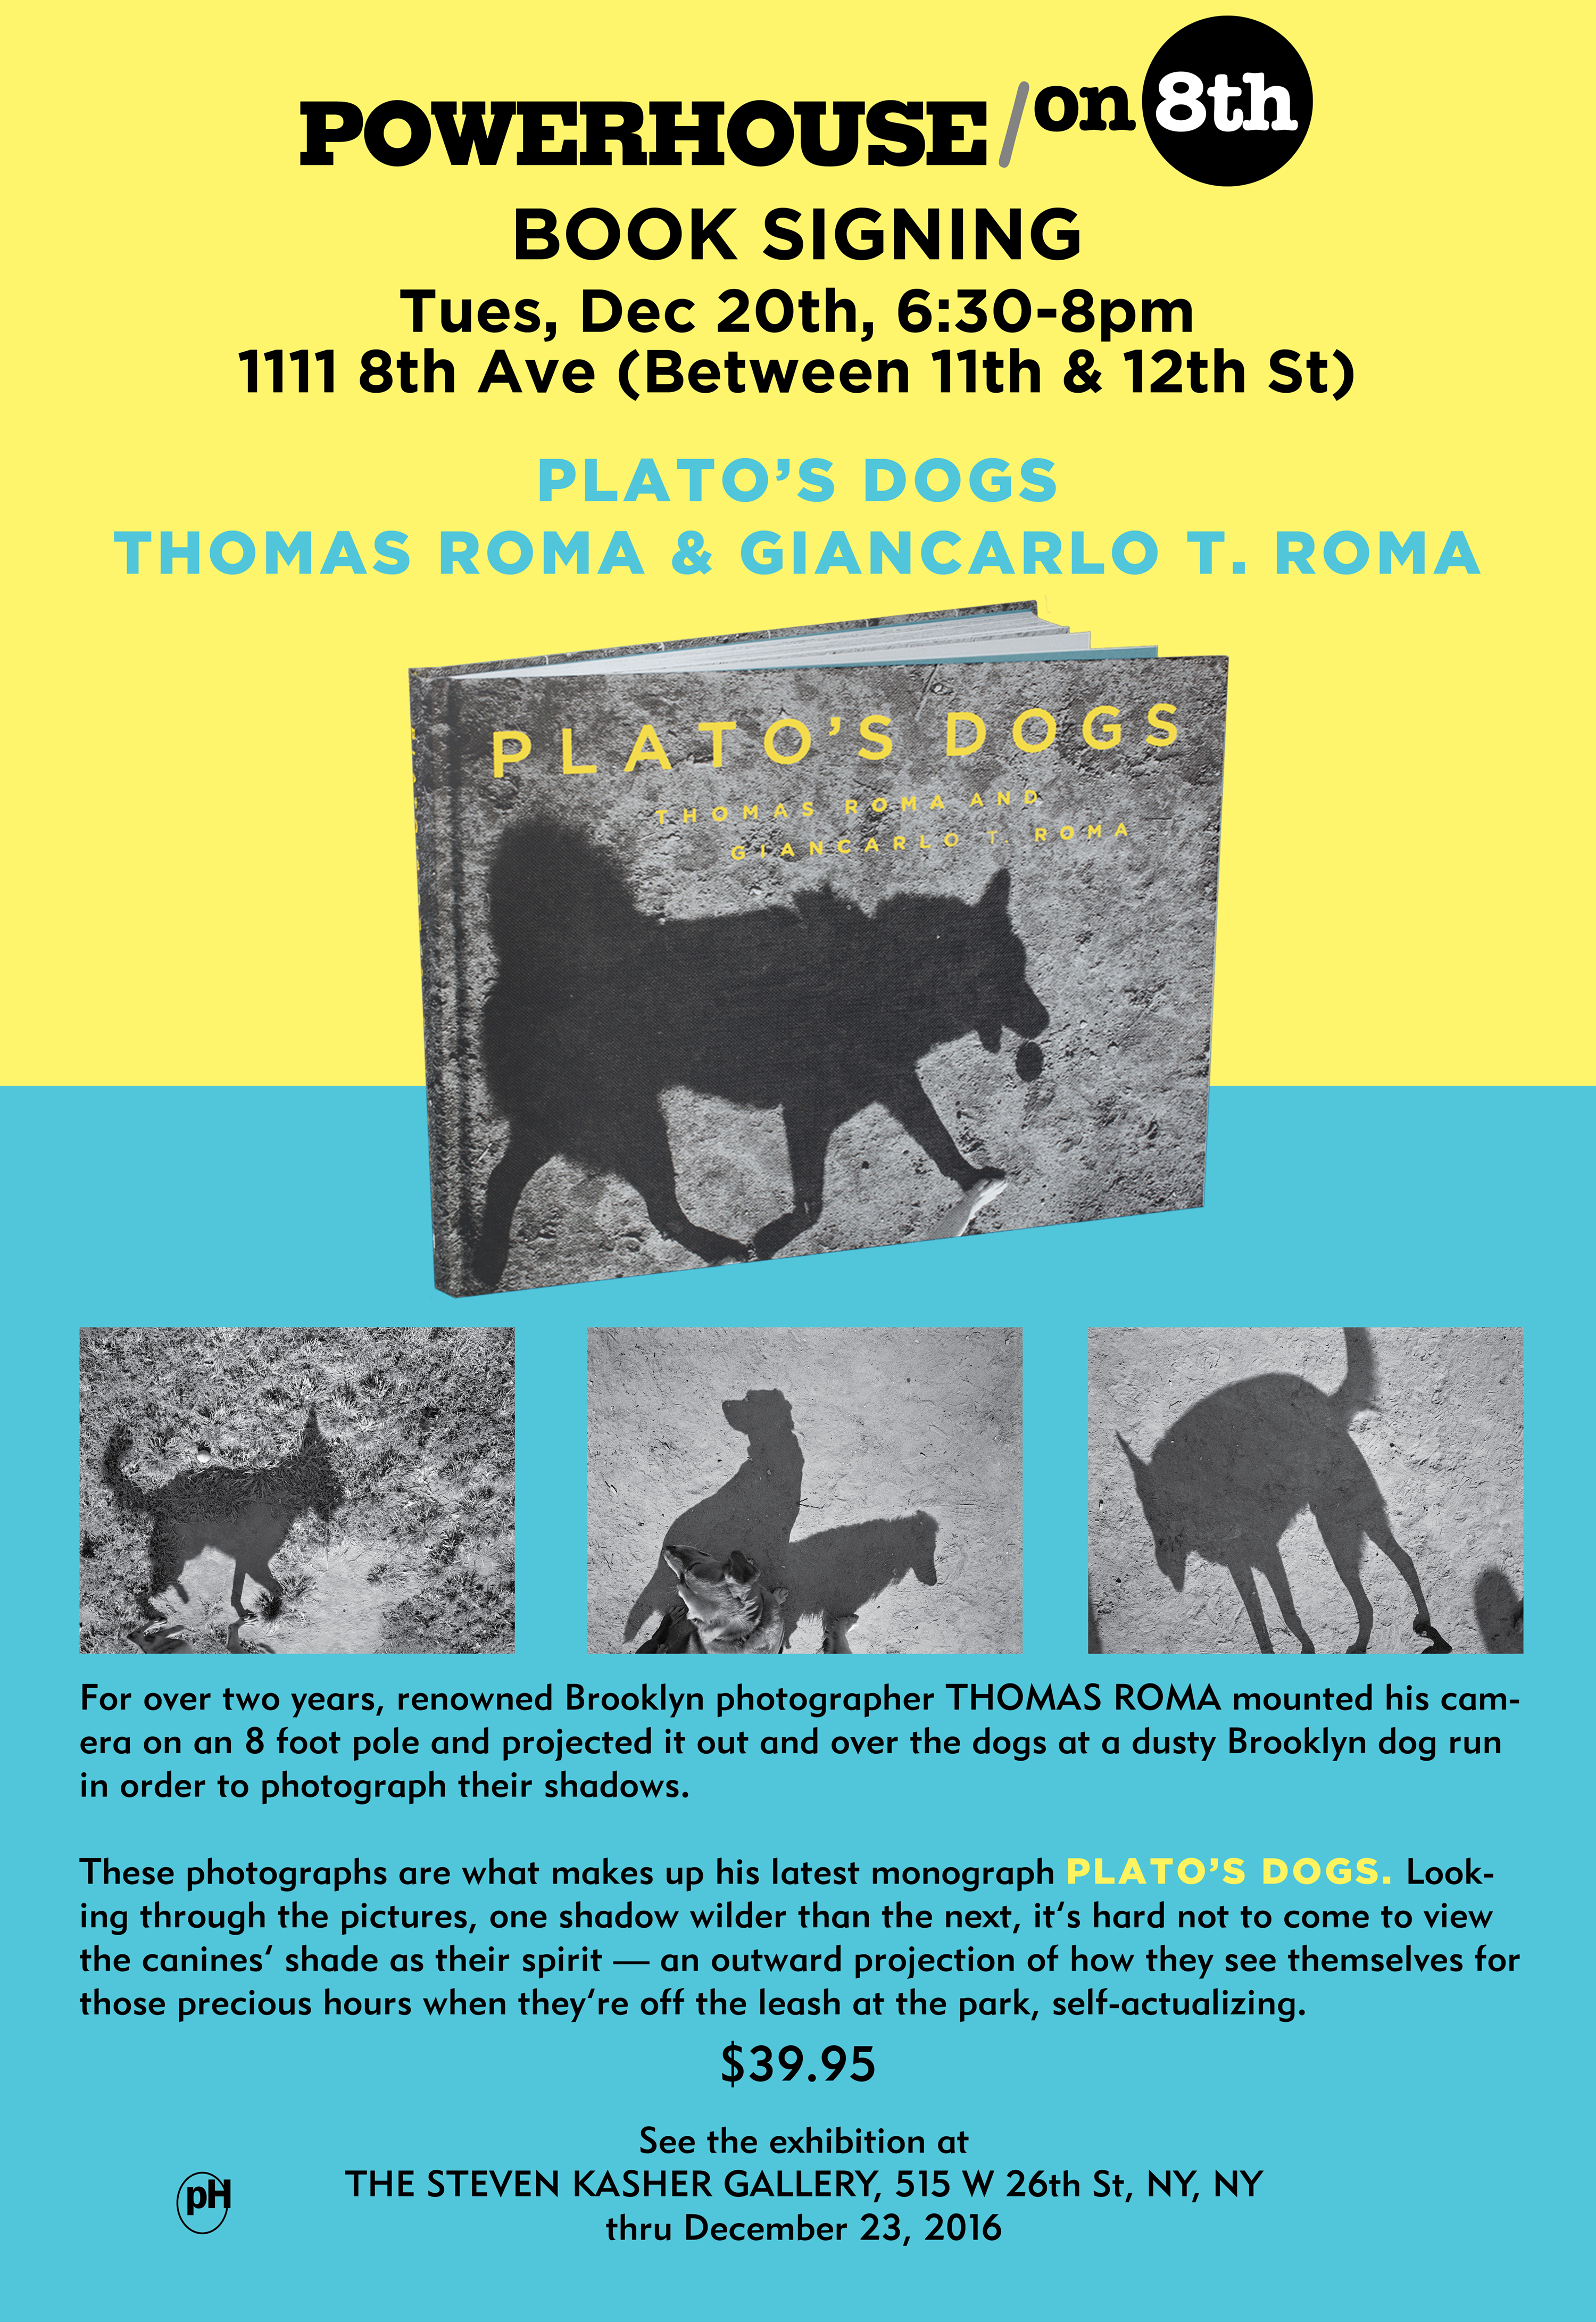 Book Signing: Plato's Dogs by Thomas Roma and Giancarlo Roma